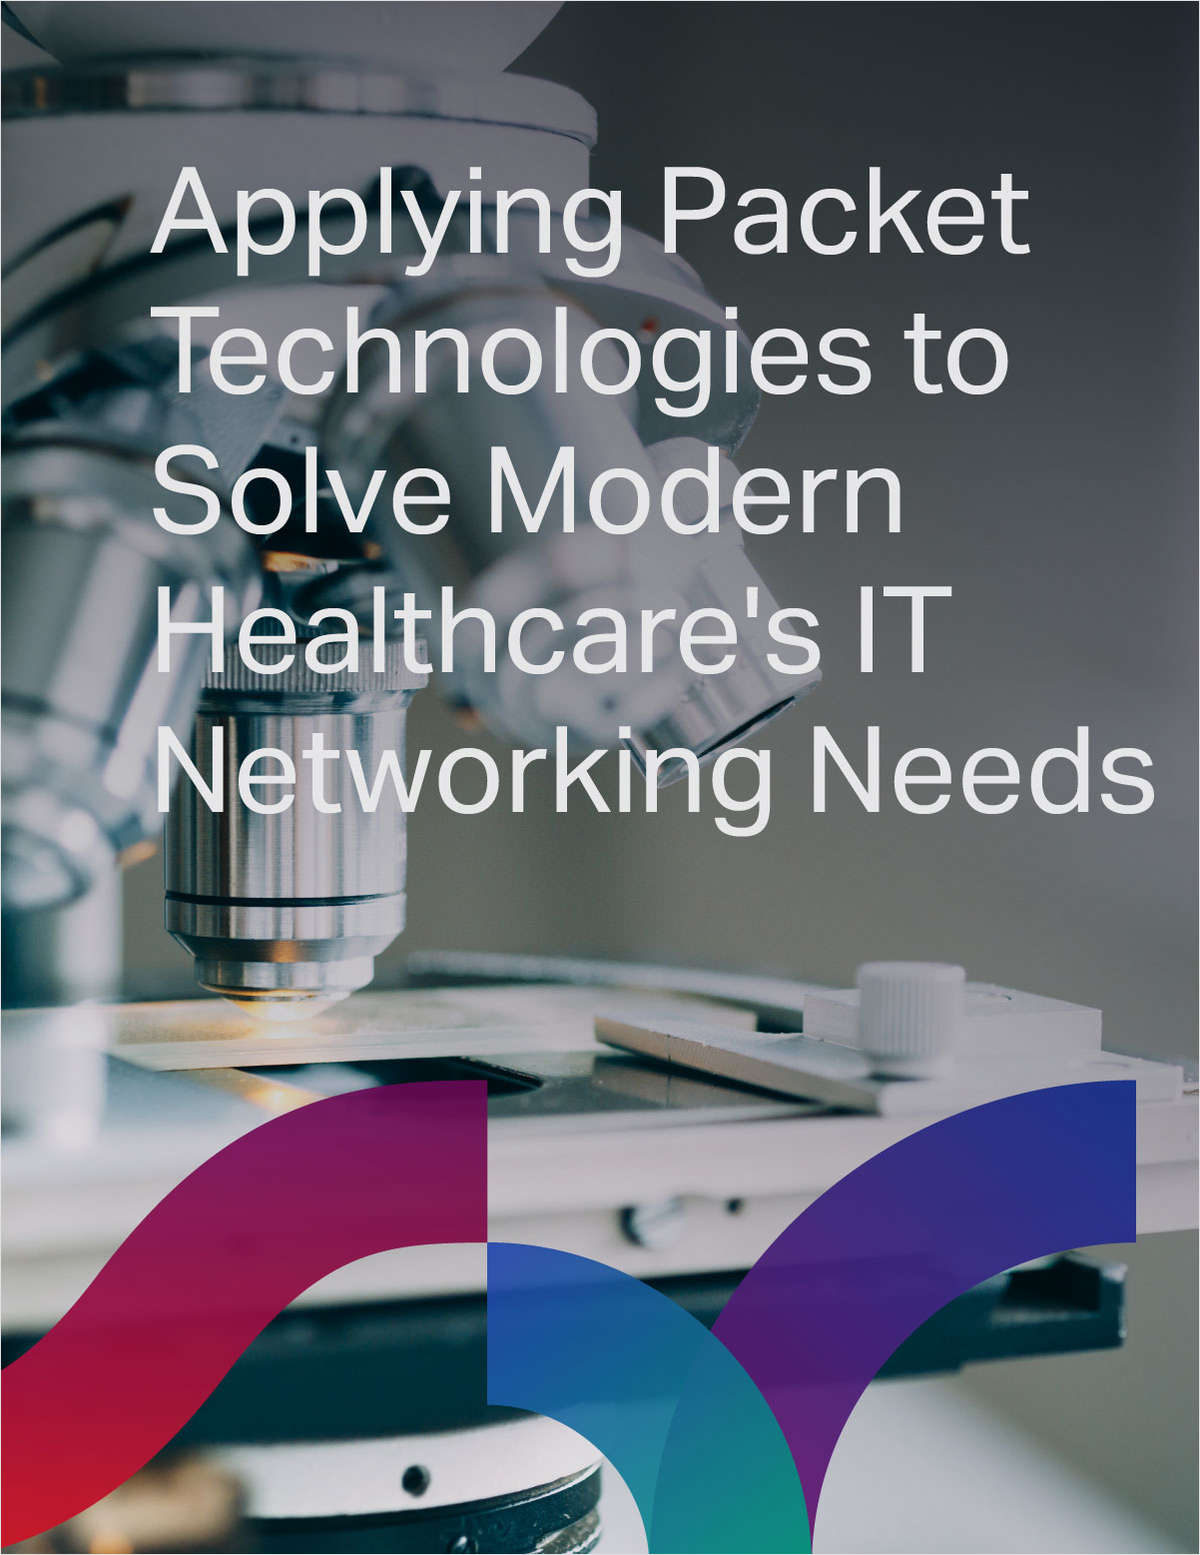 Applying Packet Technologies to Solve Modern Healthcare's IT Networking Needs